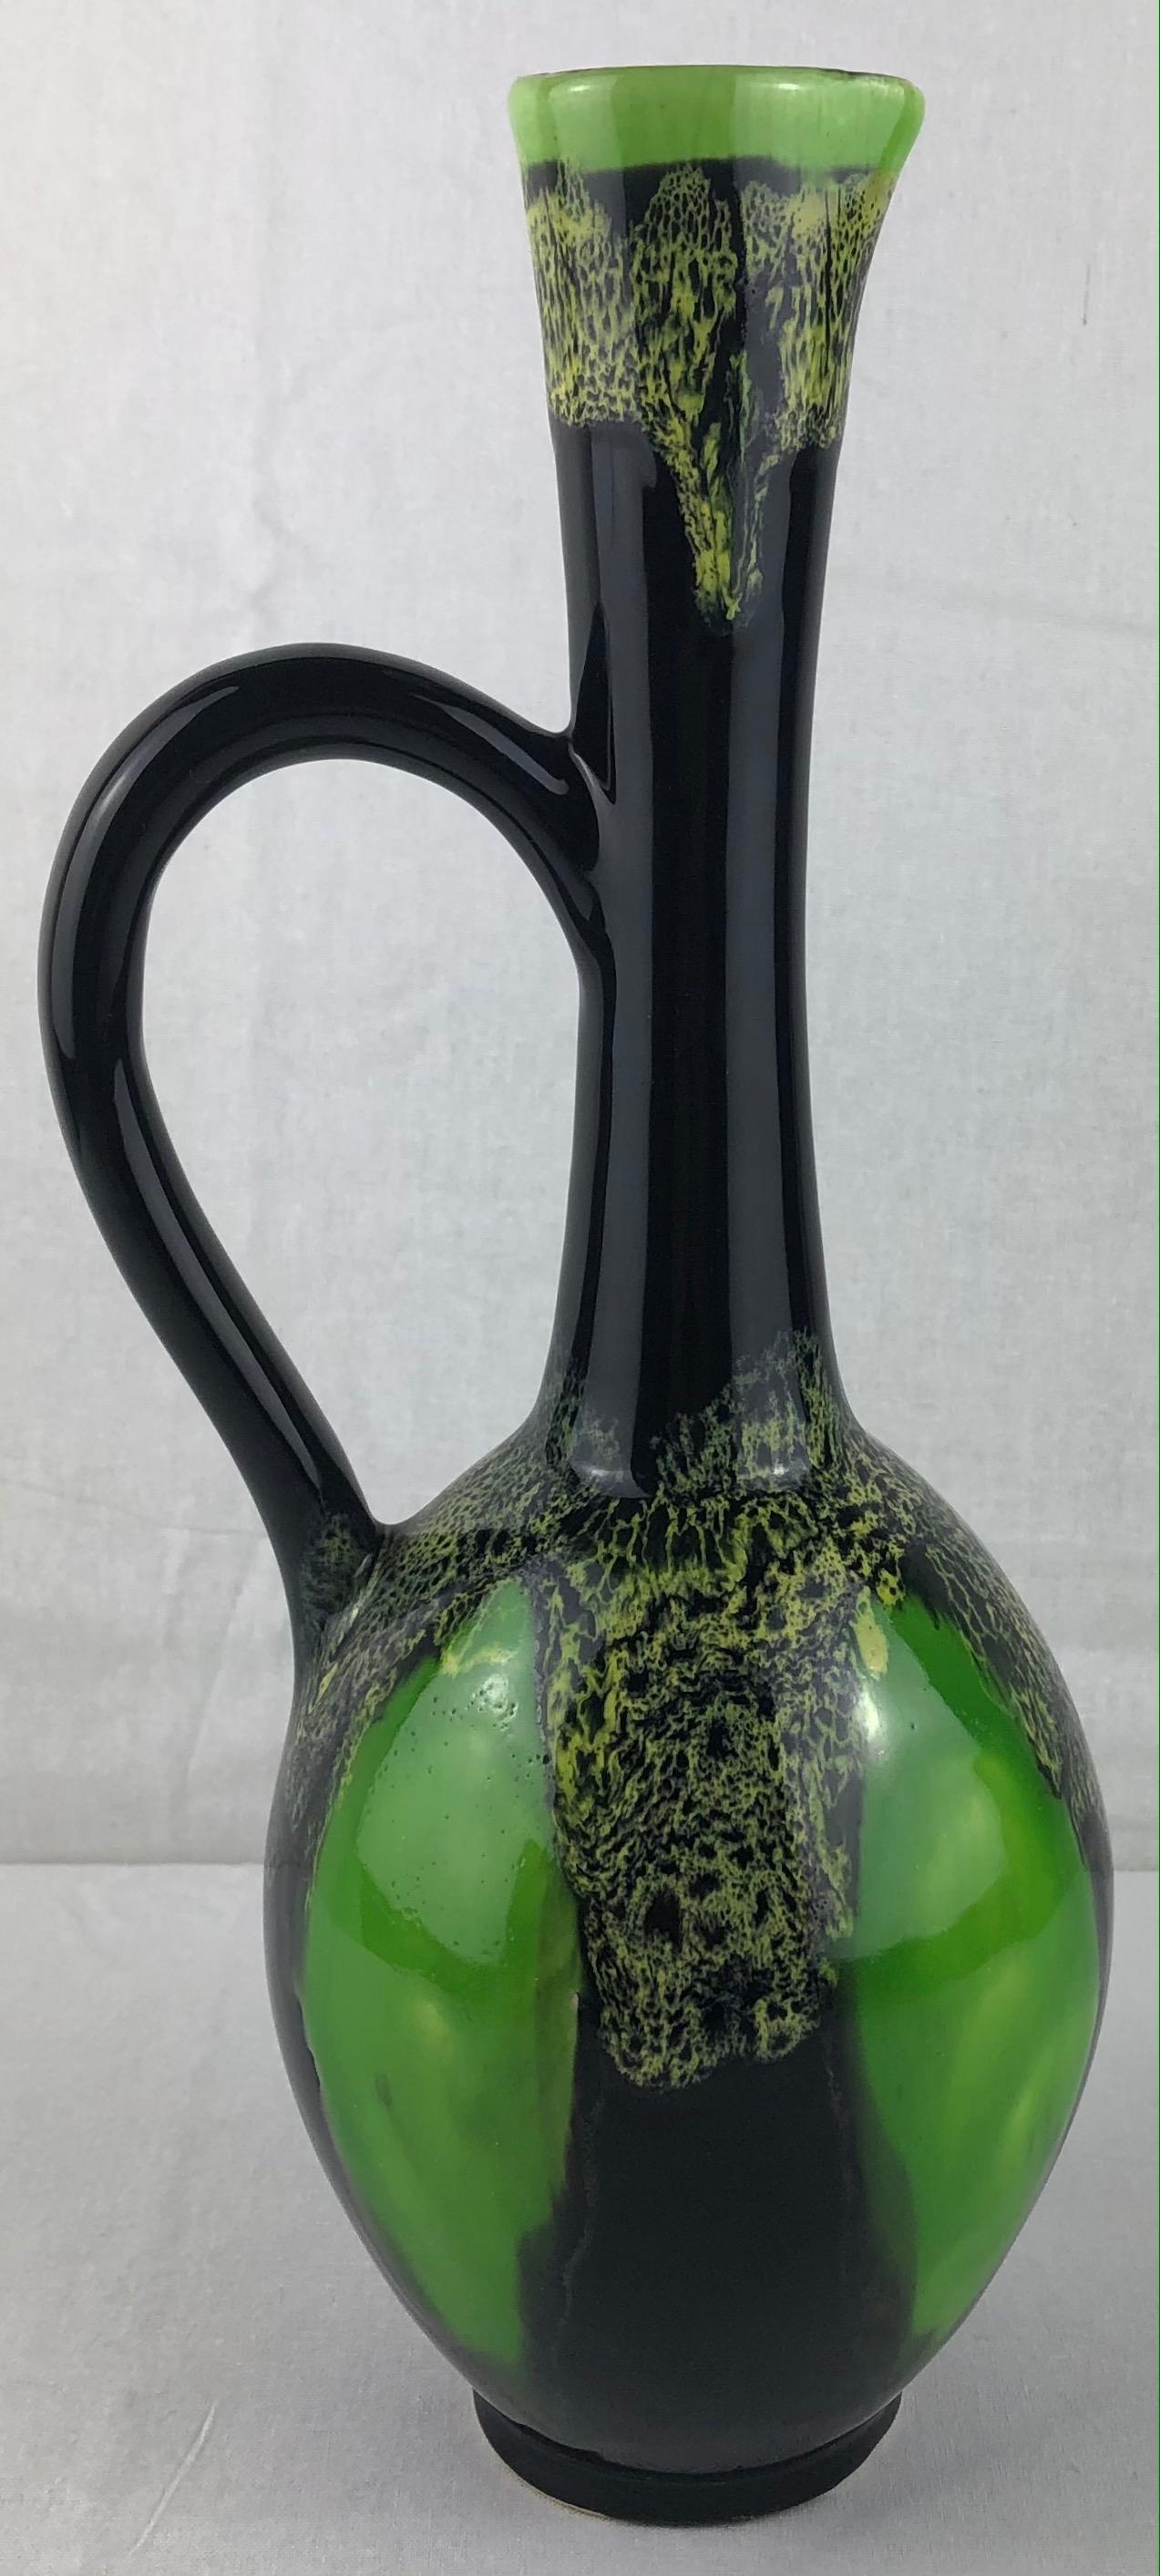 French fat lava ceramic stem flower vase with stunning green and black colors and eye catching form.

Very good vintage condition, no cracks or chips. 
Measures: 12 1/8